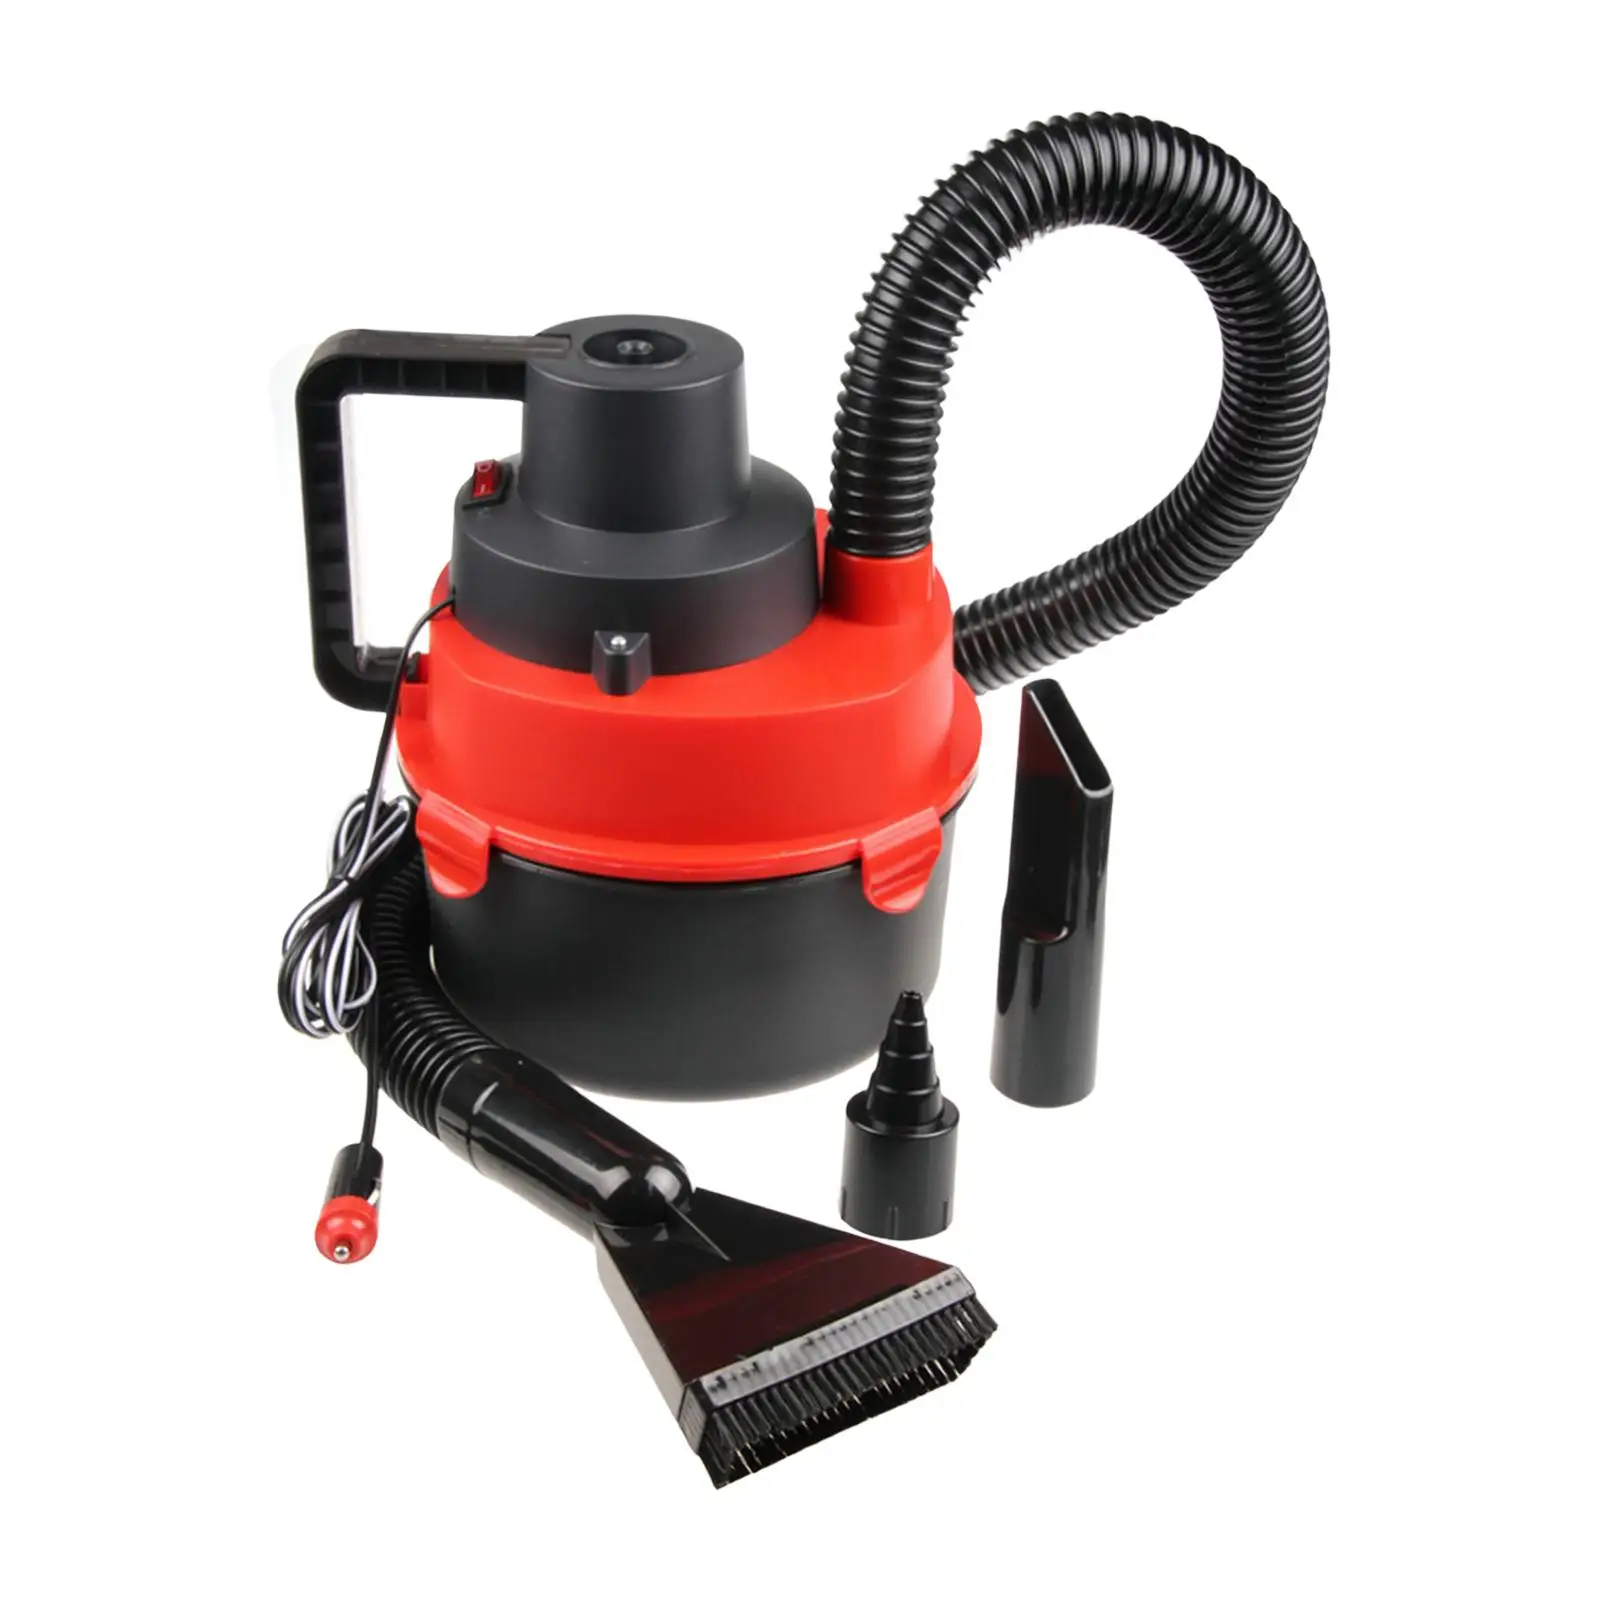 12V Wet/Dry Car Canister Vacuum for Truck Van 3 Nozzle Attachments Portable